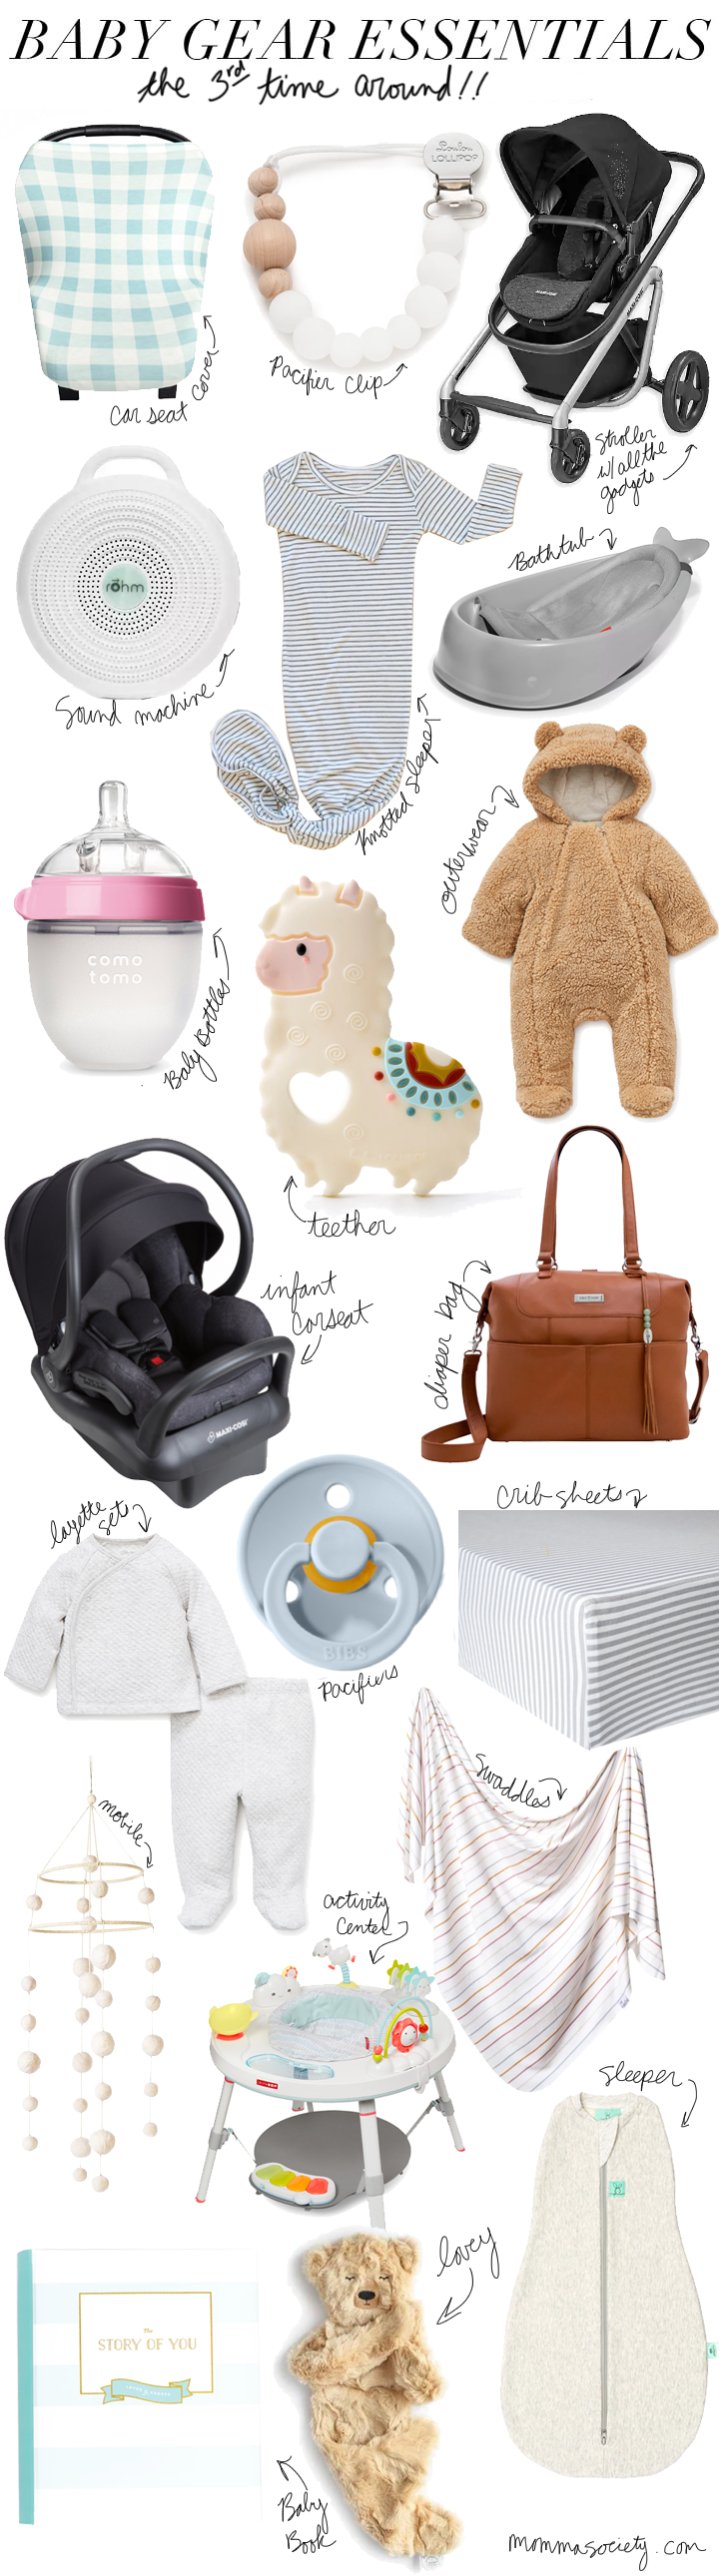 Baby Gear - The Small Things Blog